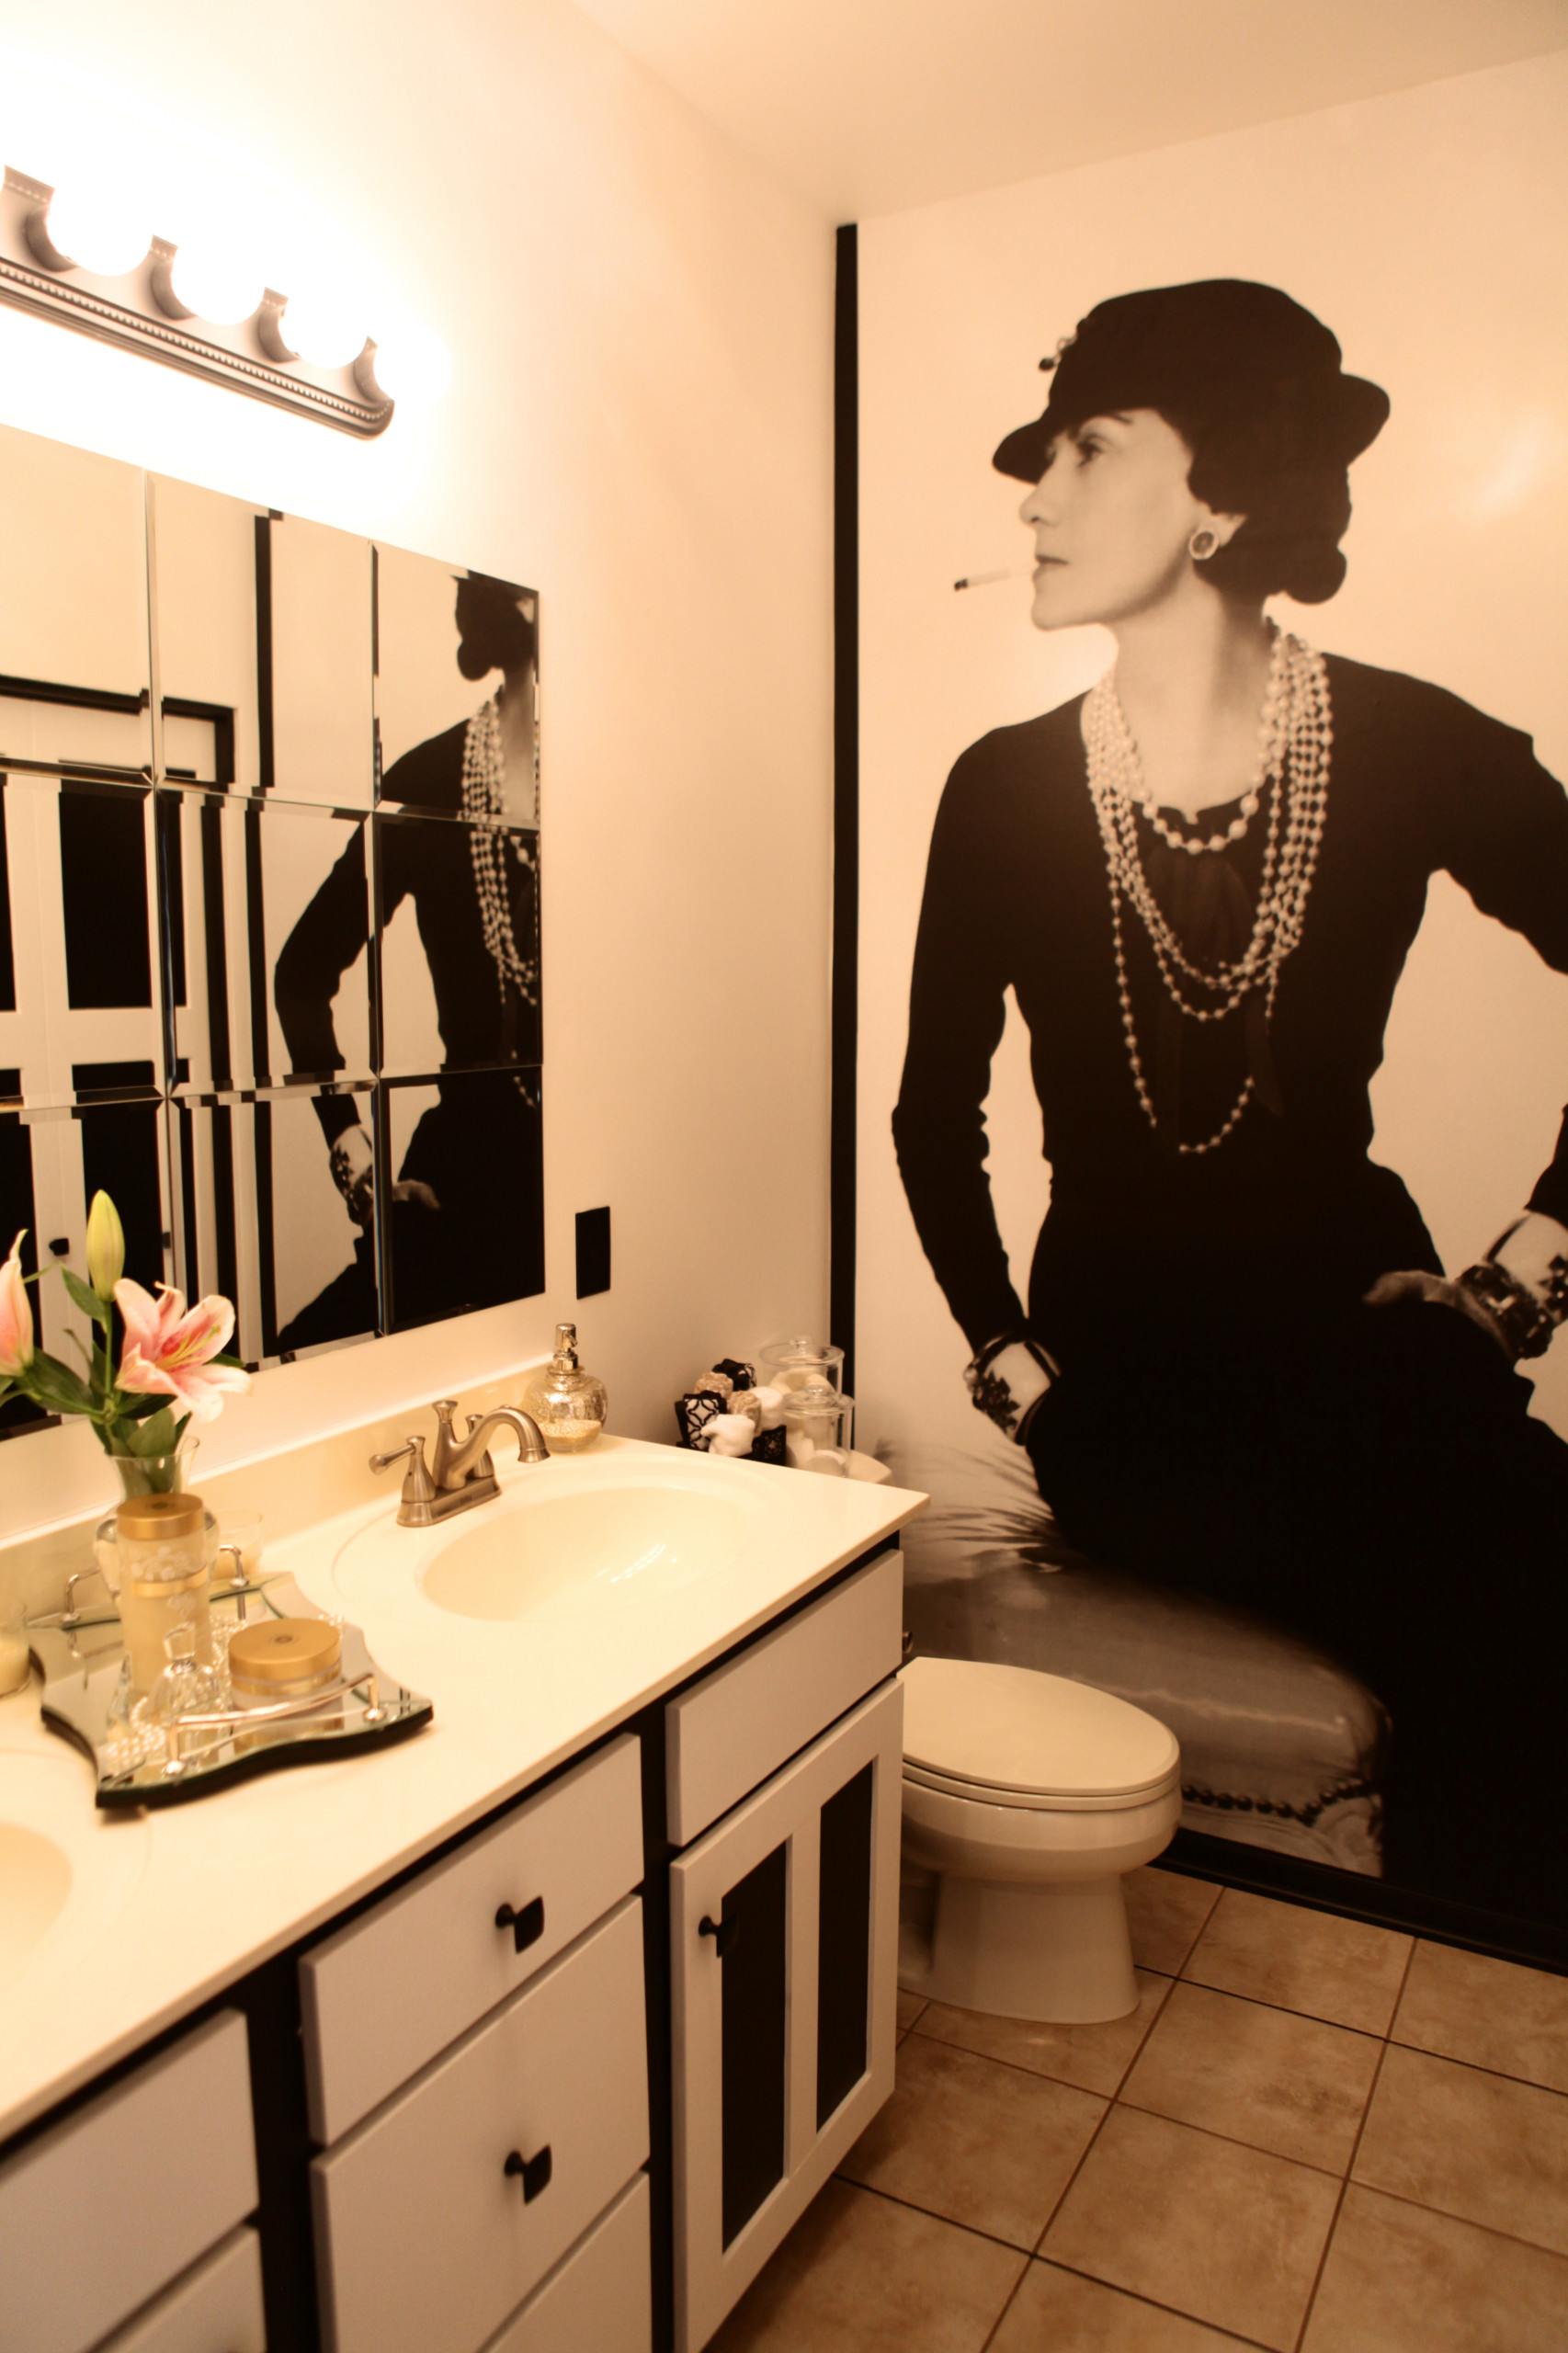 Coco Chanel Inspired Bathroom by Sarah F. Gordon, Professional Organizer &  Home - Contemporary - Bathroom - Minneapolis - by Sarah F.  Gordon-Prof.Organizer & Home Stager | Houzz